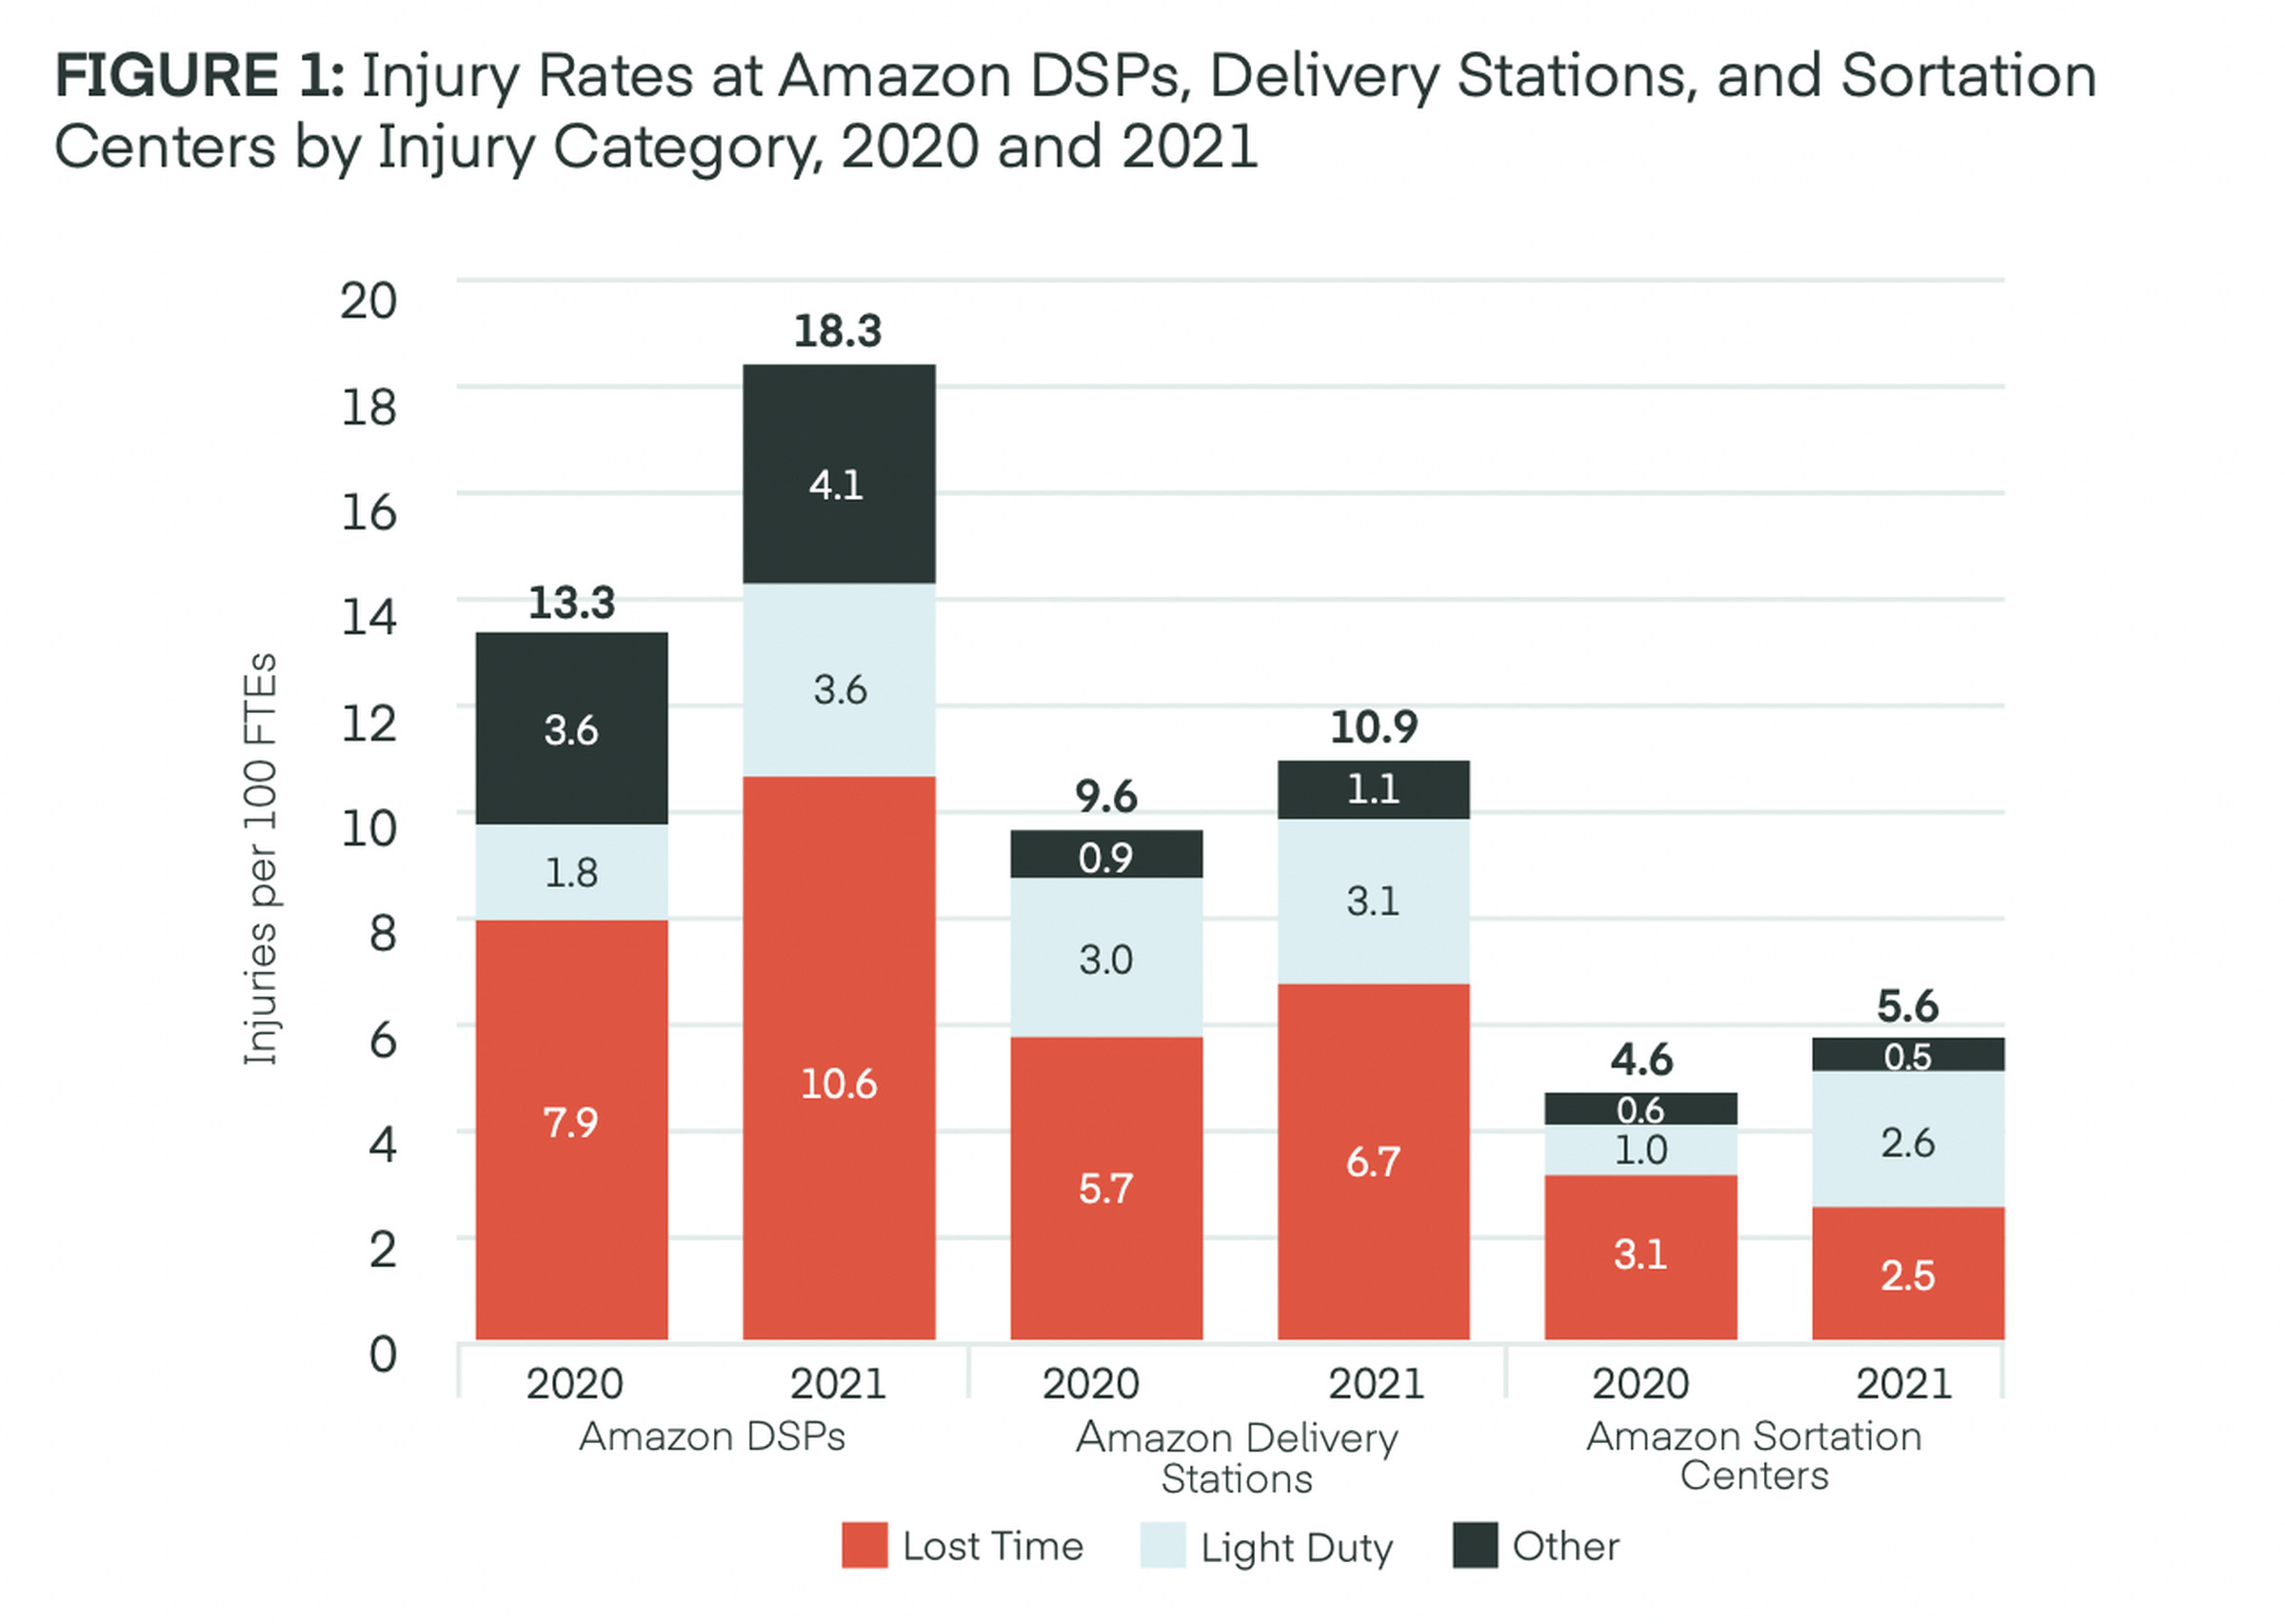 The report claims that the injury rates for Amazon’s delivery workers has increased since 2020 as the company’s business boomed.